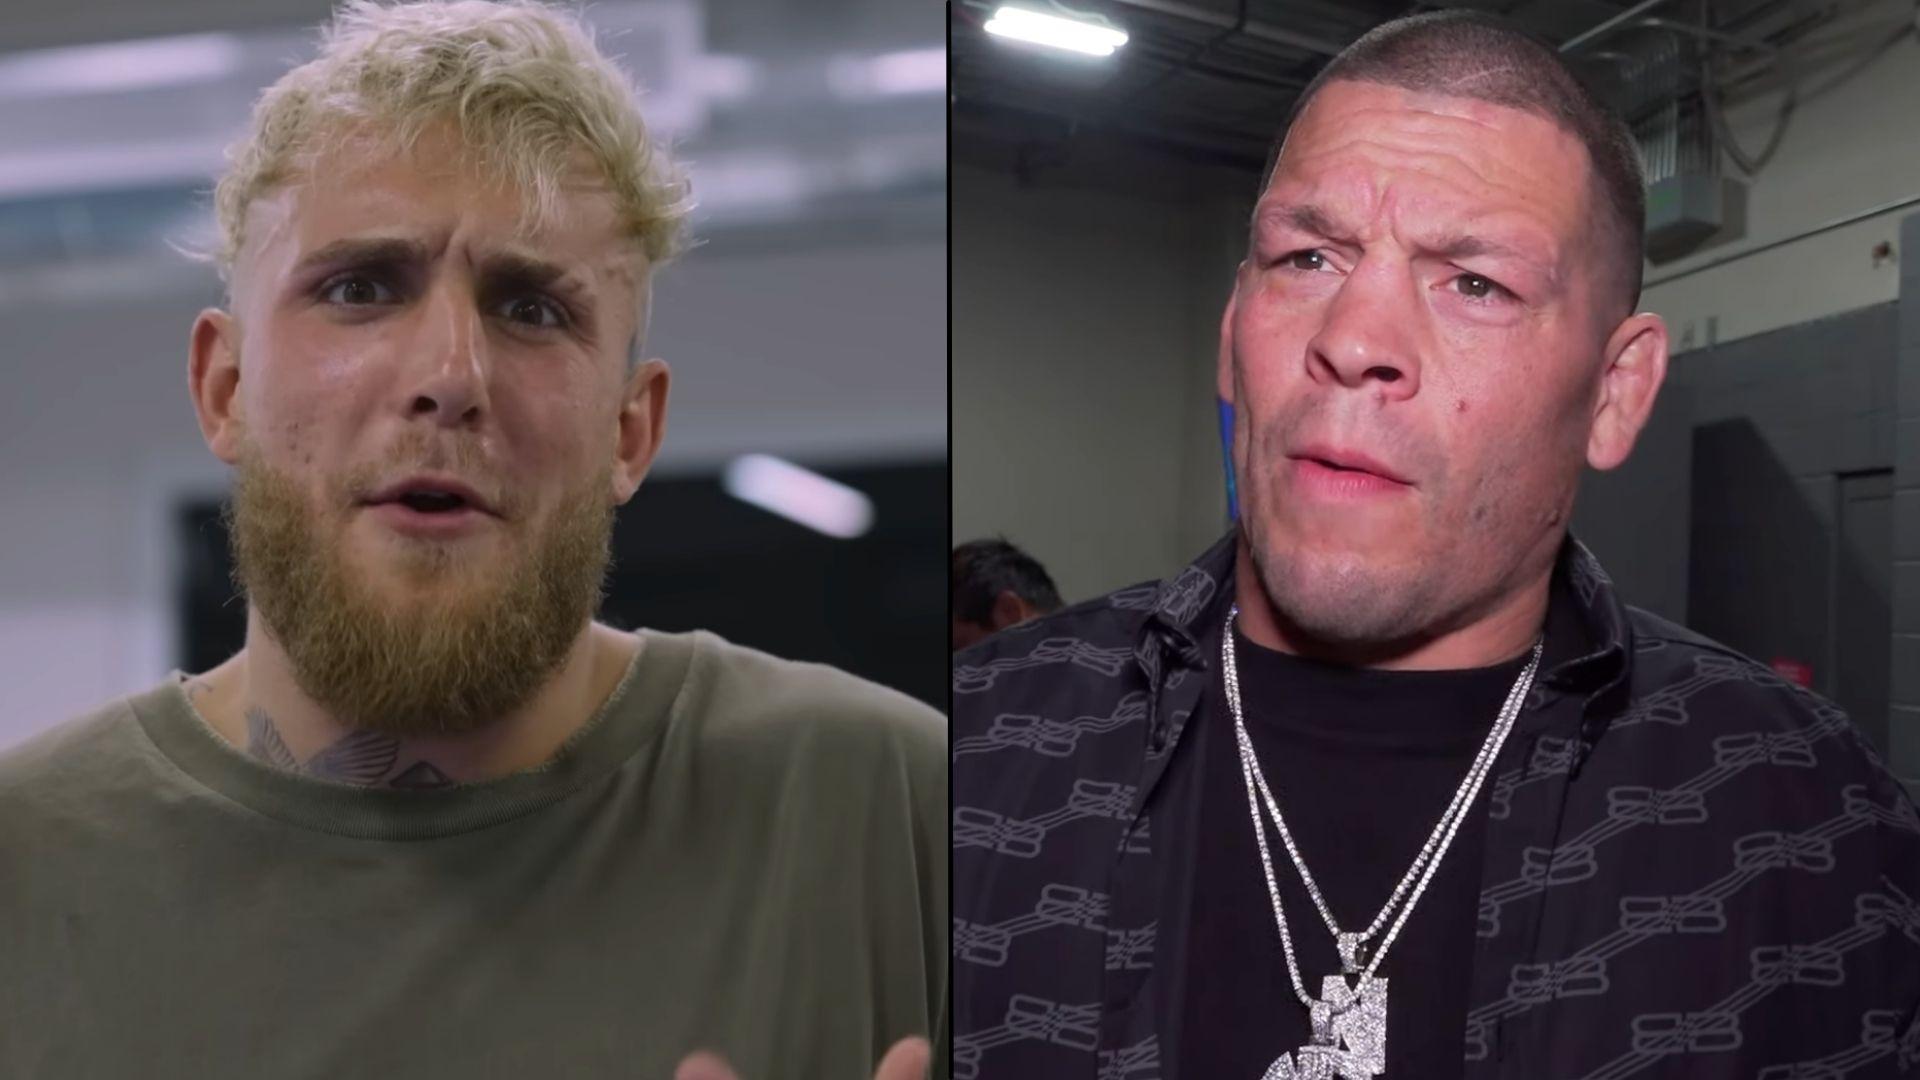 Jake Paul and Nate Diaz side-by-side talking to camera